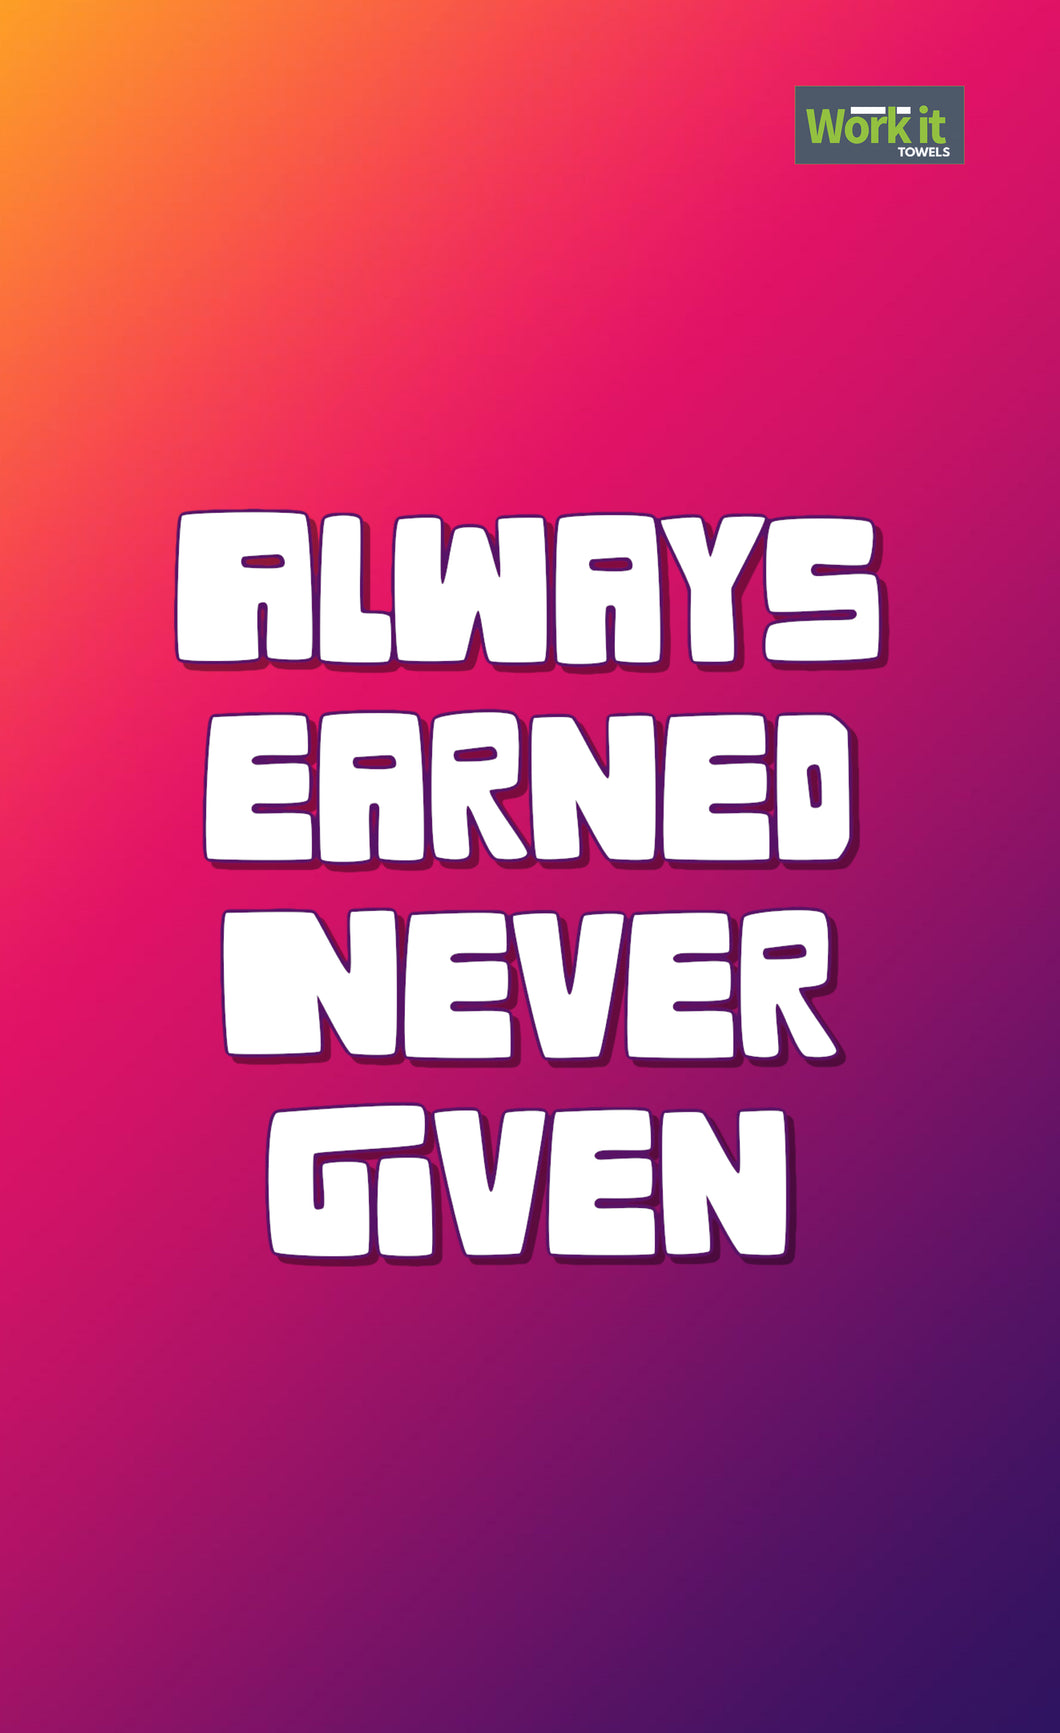 Always Earned, Never Given - work it towels